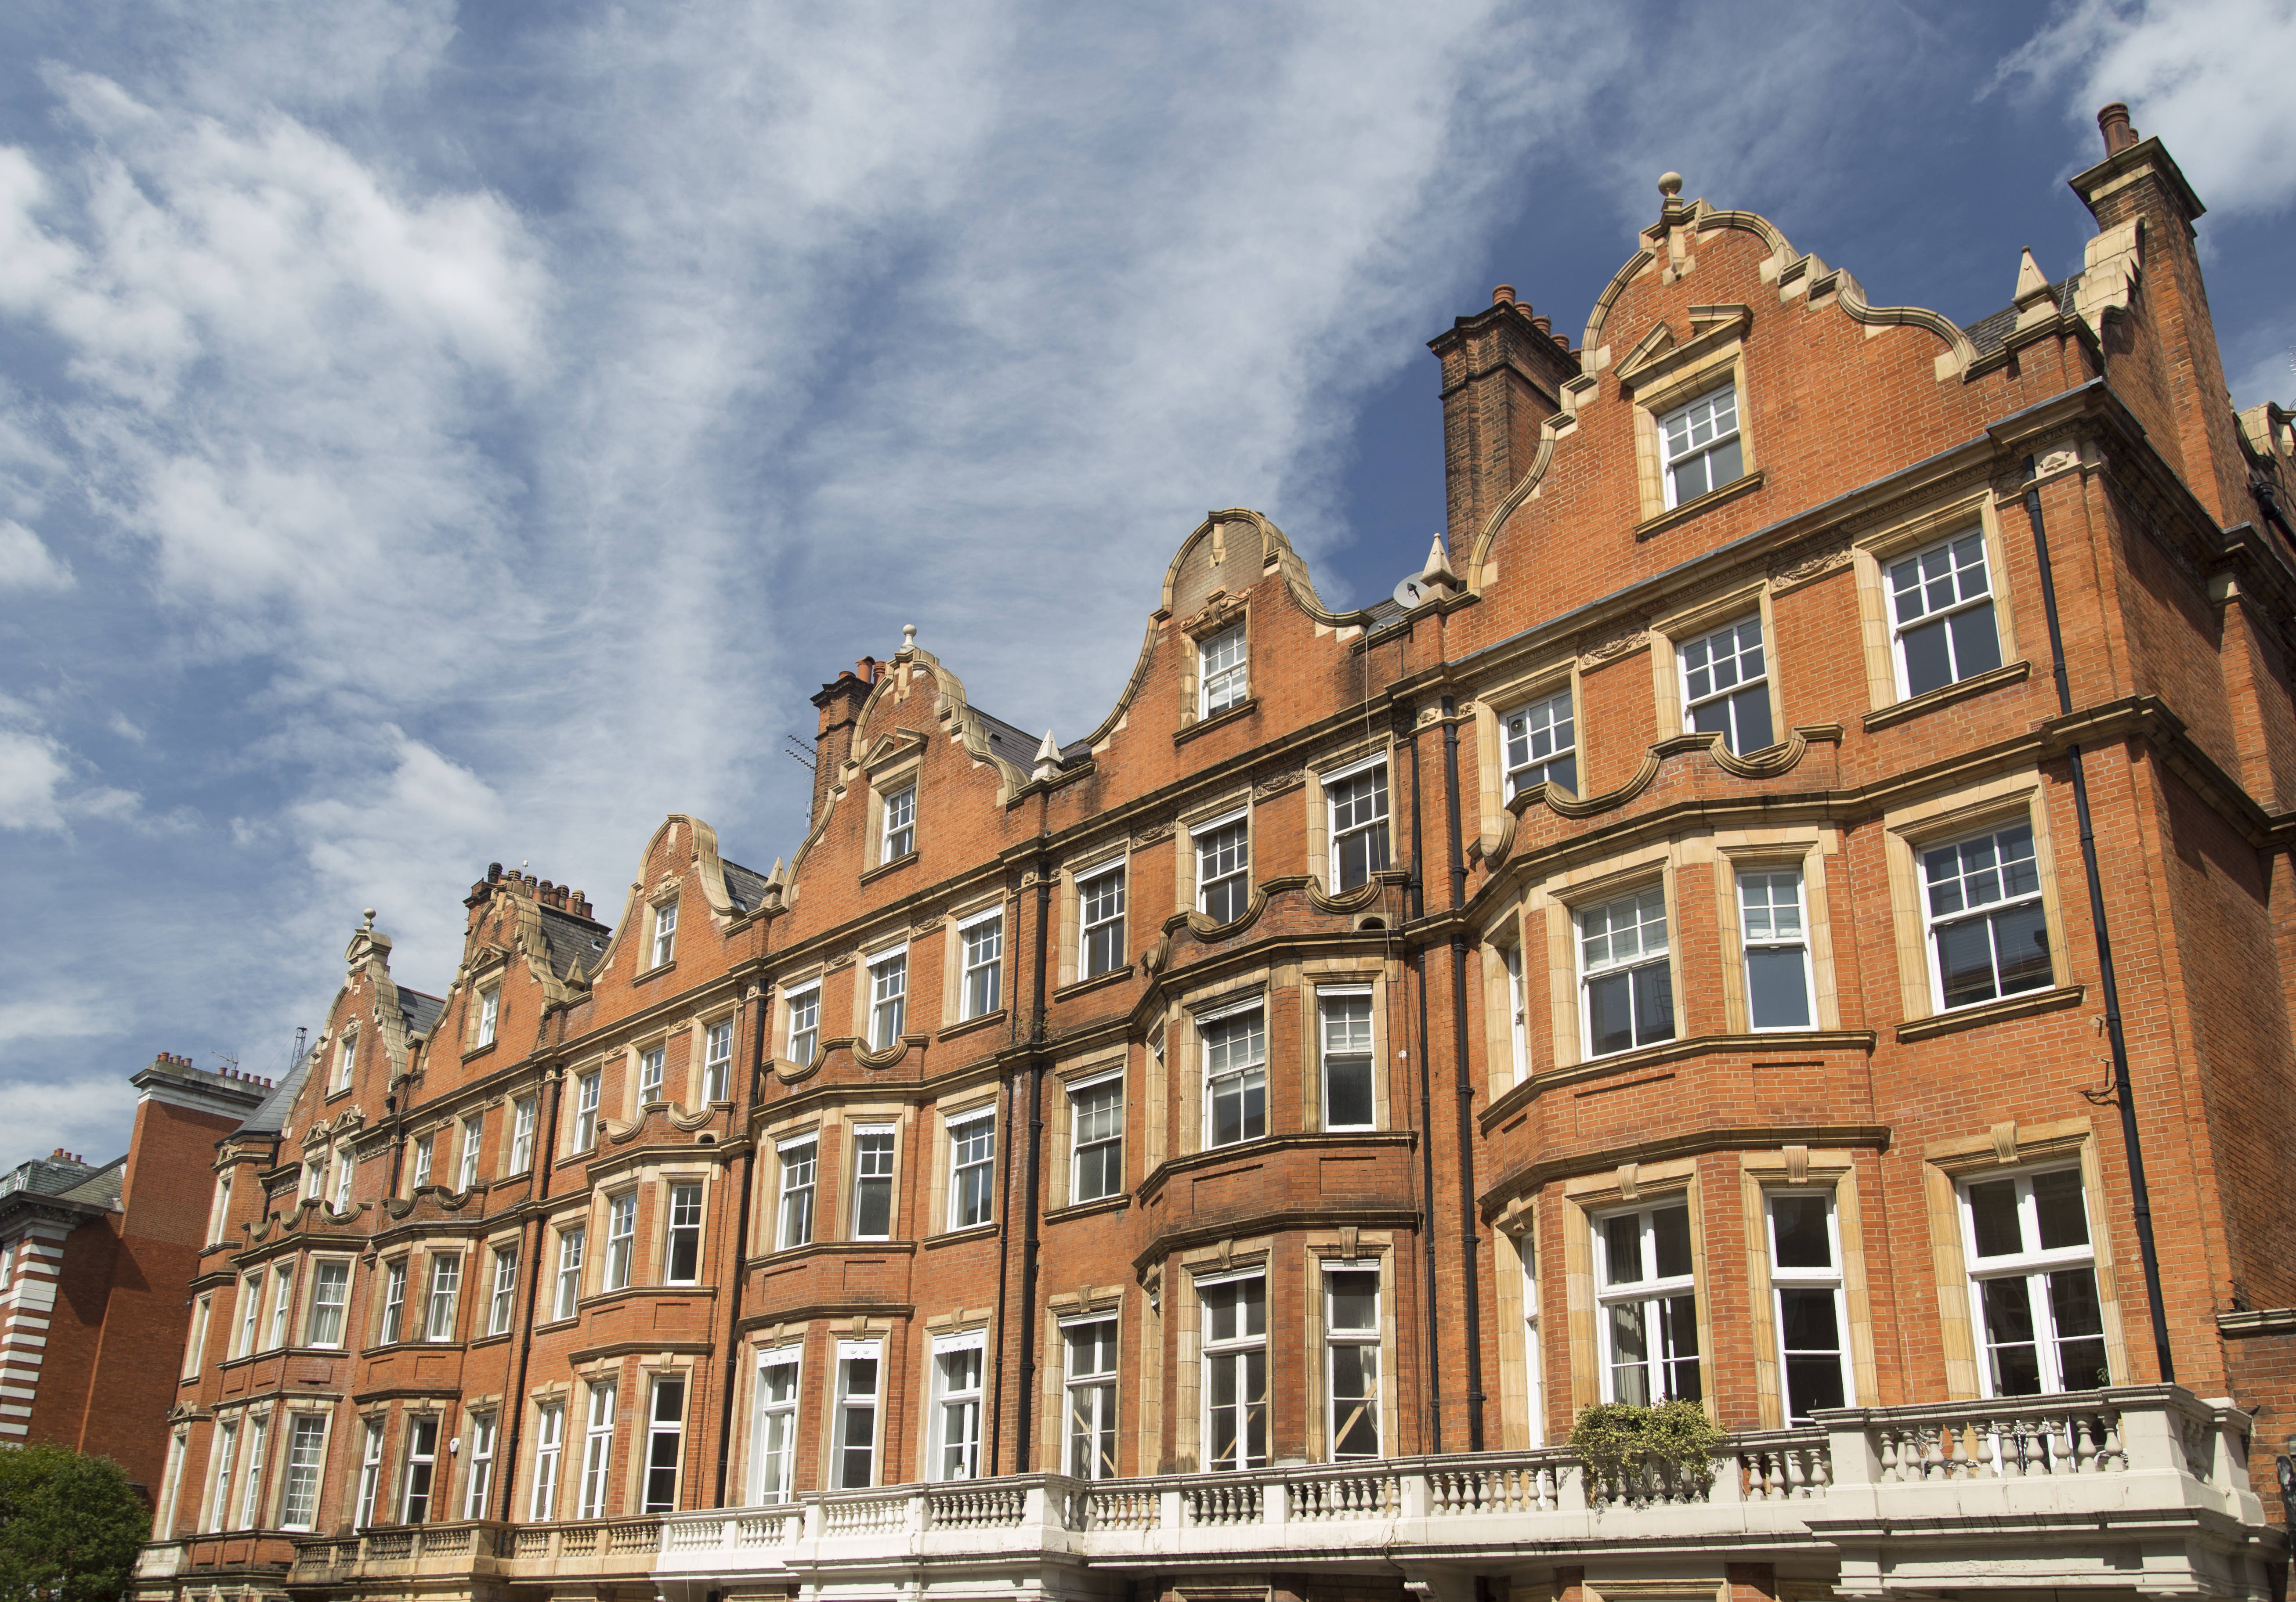 A row of red brick apartments in Mayfair – a prime target for Asian buyers. Photo: Getty Images/iStockphoto